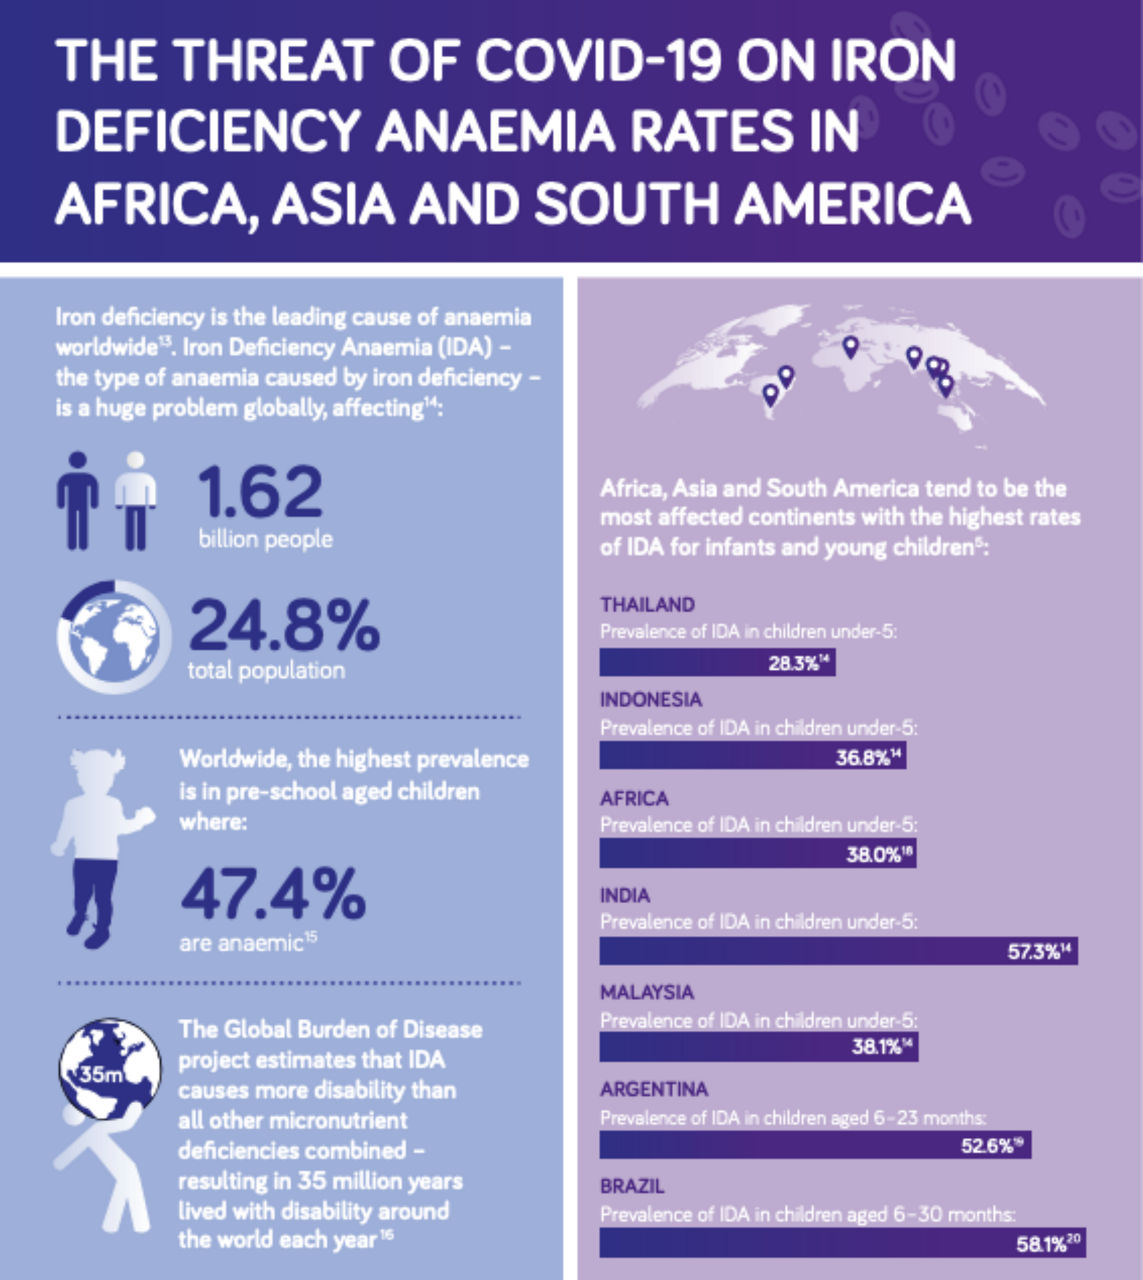 nutricia-covid-19-iron-deficiency-infographic-1-new.png